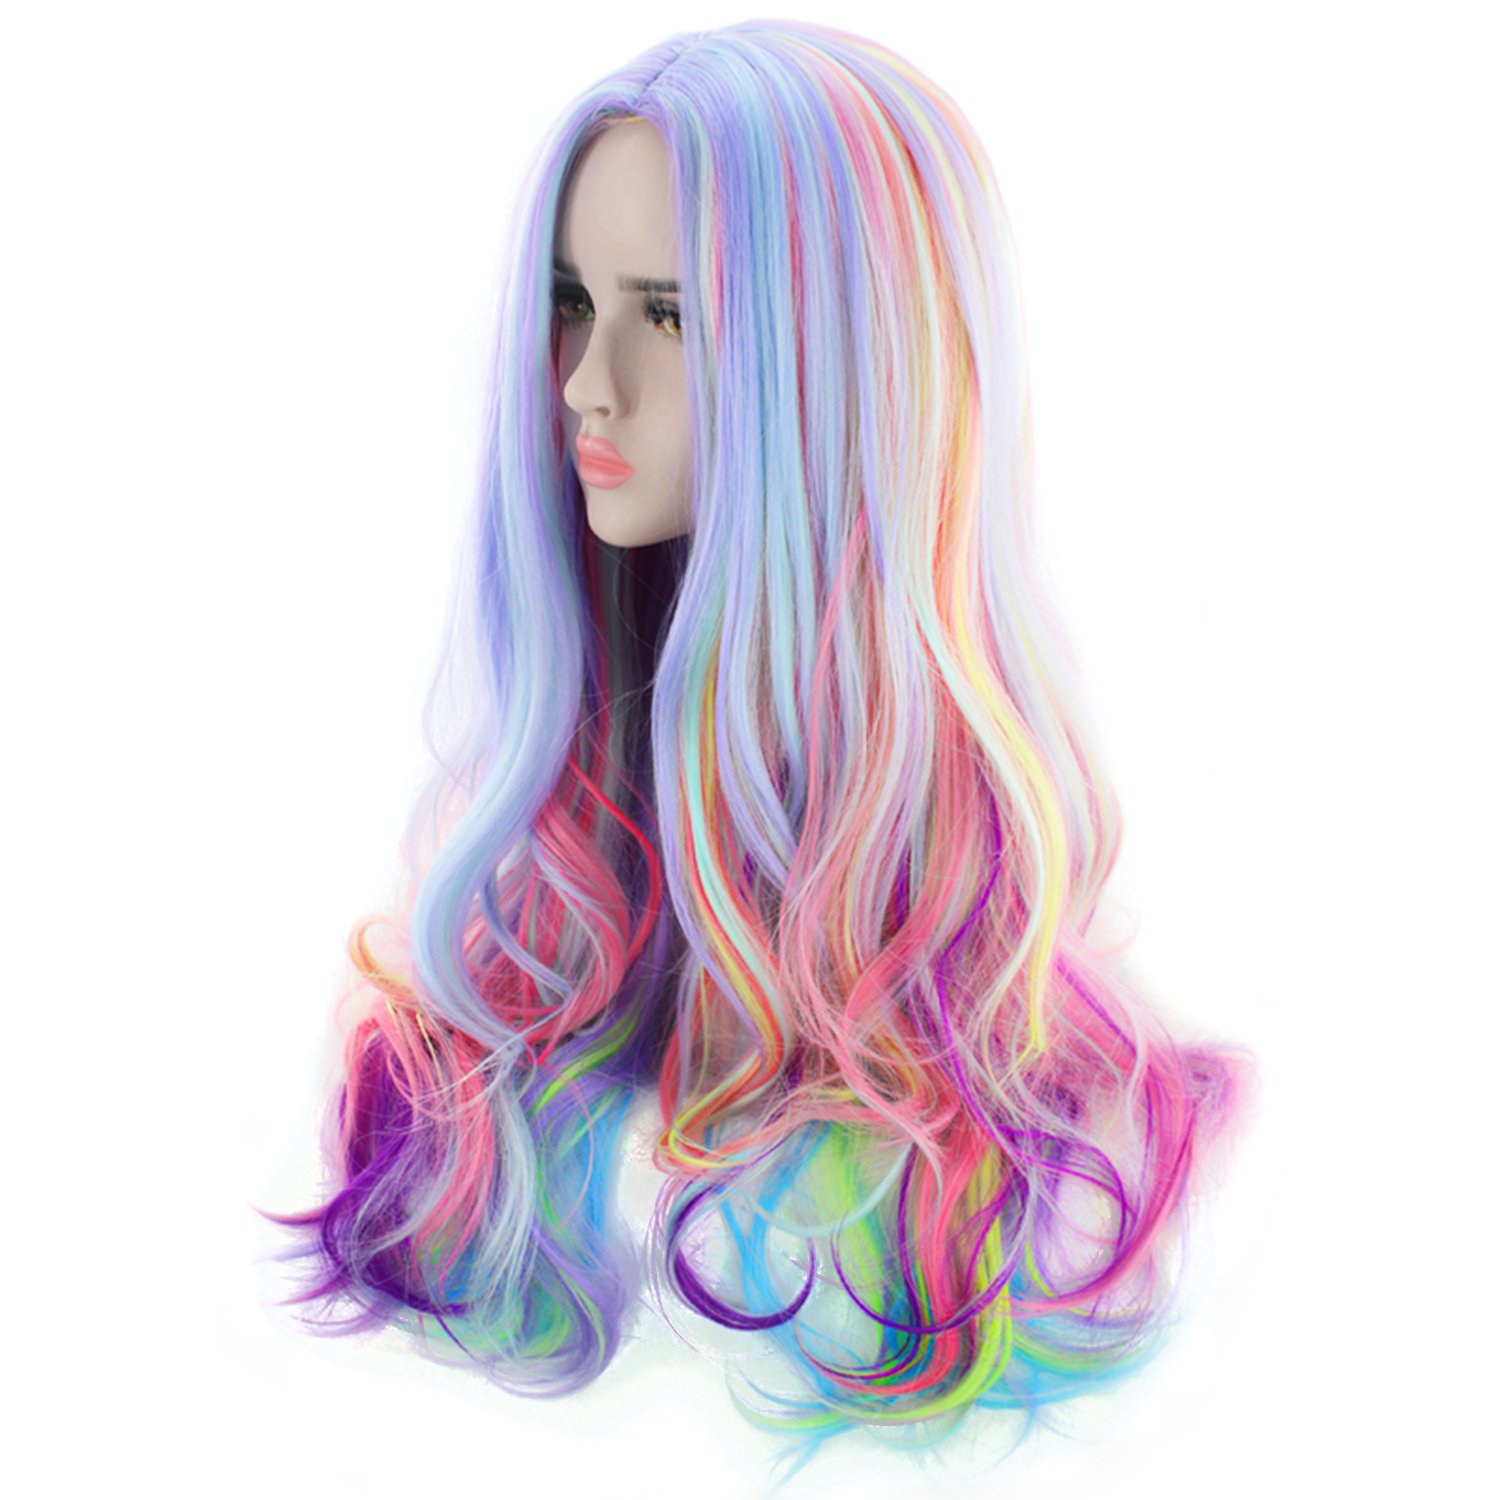 Price:$12.99    AGPtEK Full Long Curly Wavy Rainbow Hair Wig, Heat Resistant Wig for Music Festival, Theme Parties, Wedding, Concerts, Dating, Cosplay & More  Beauty